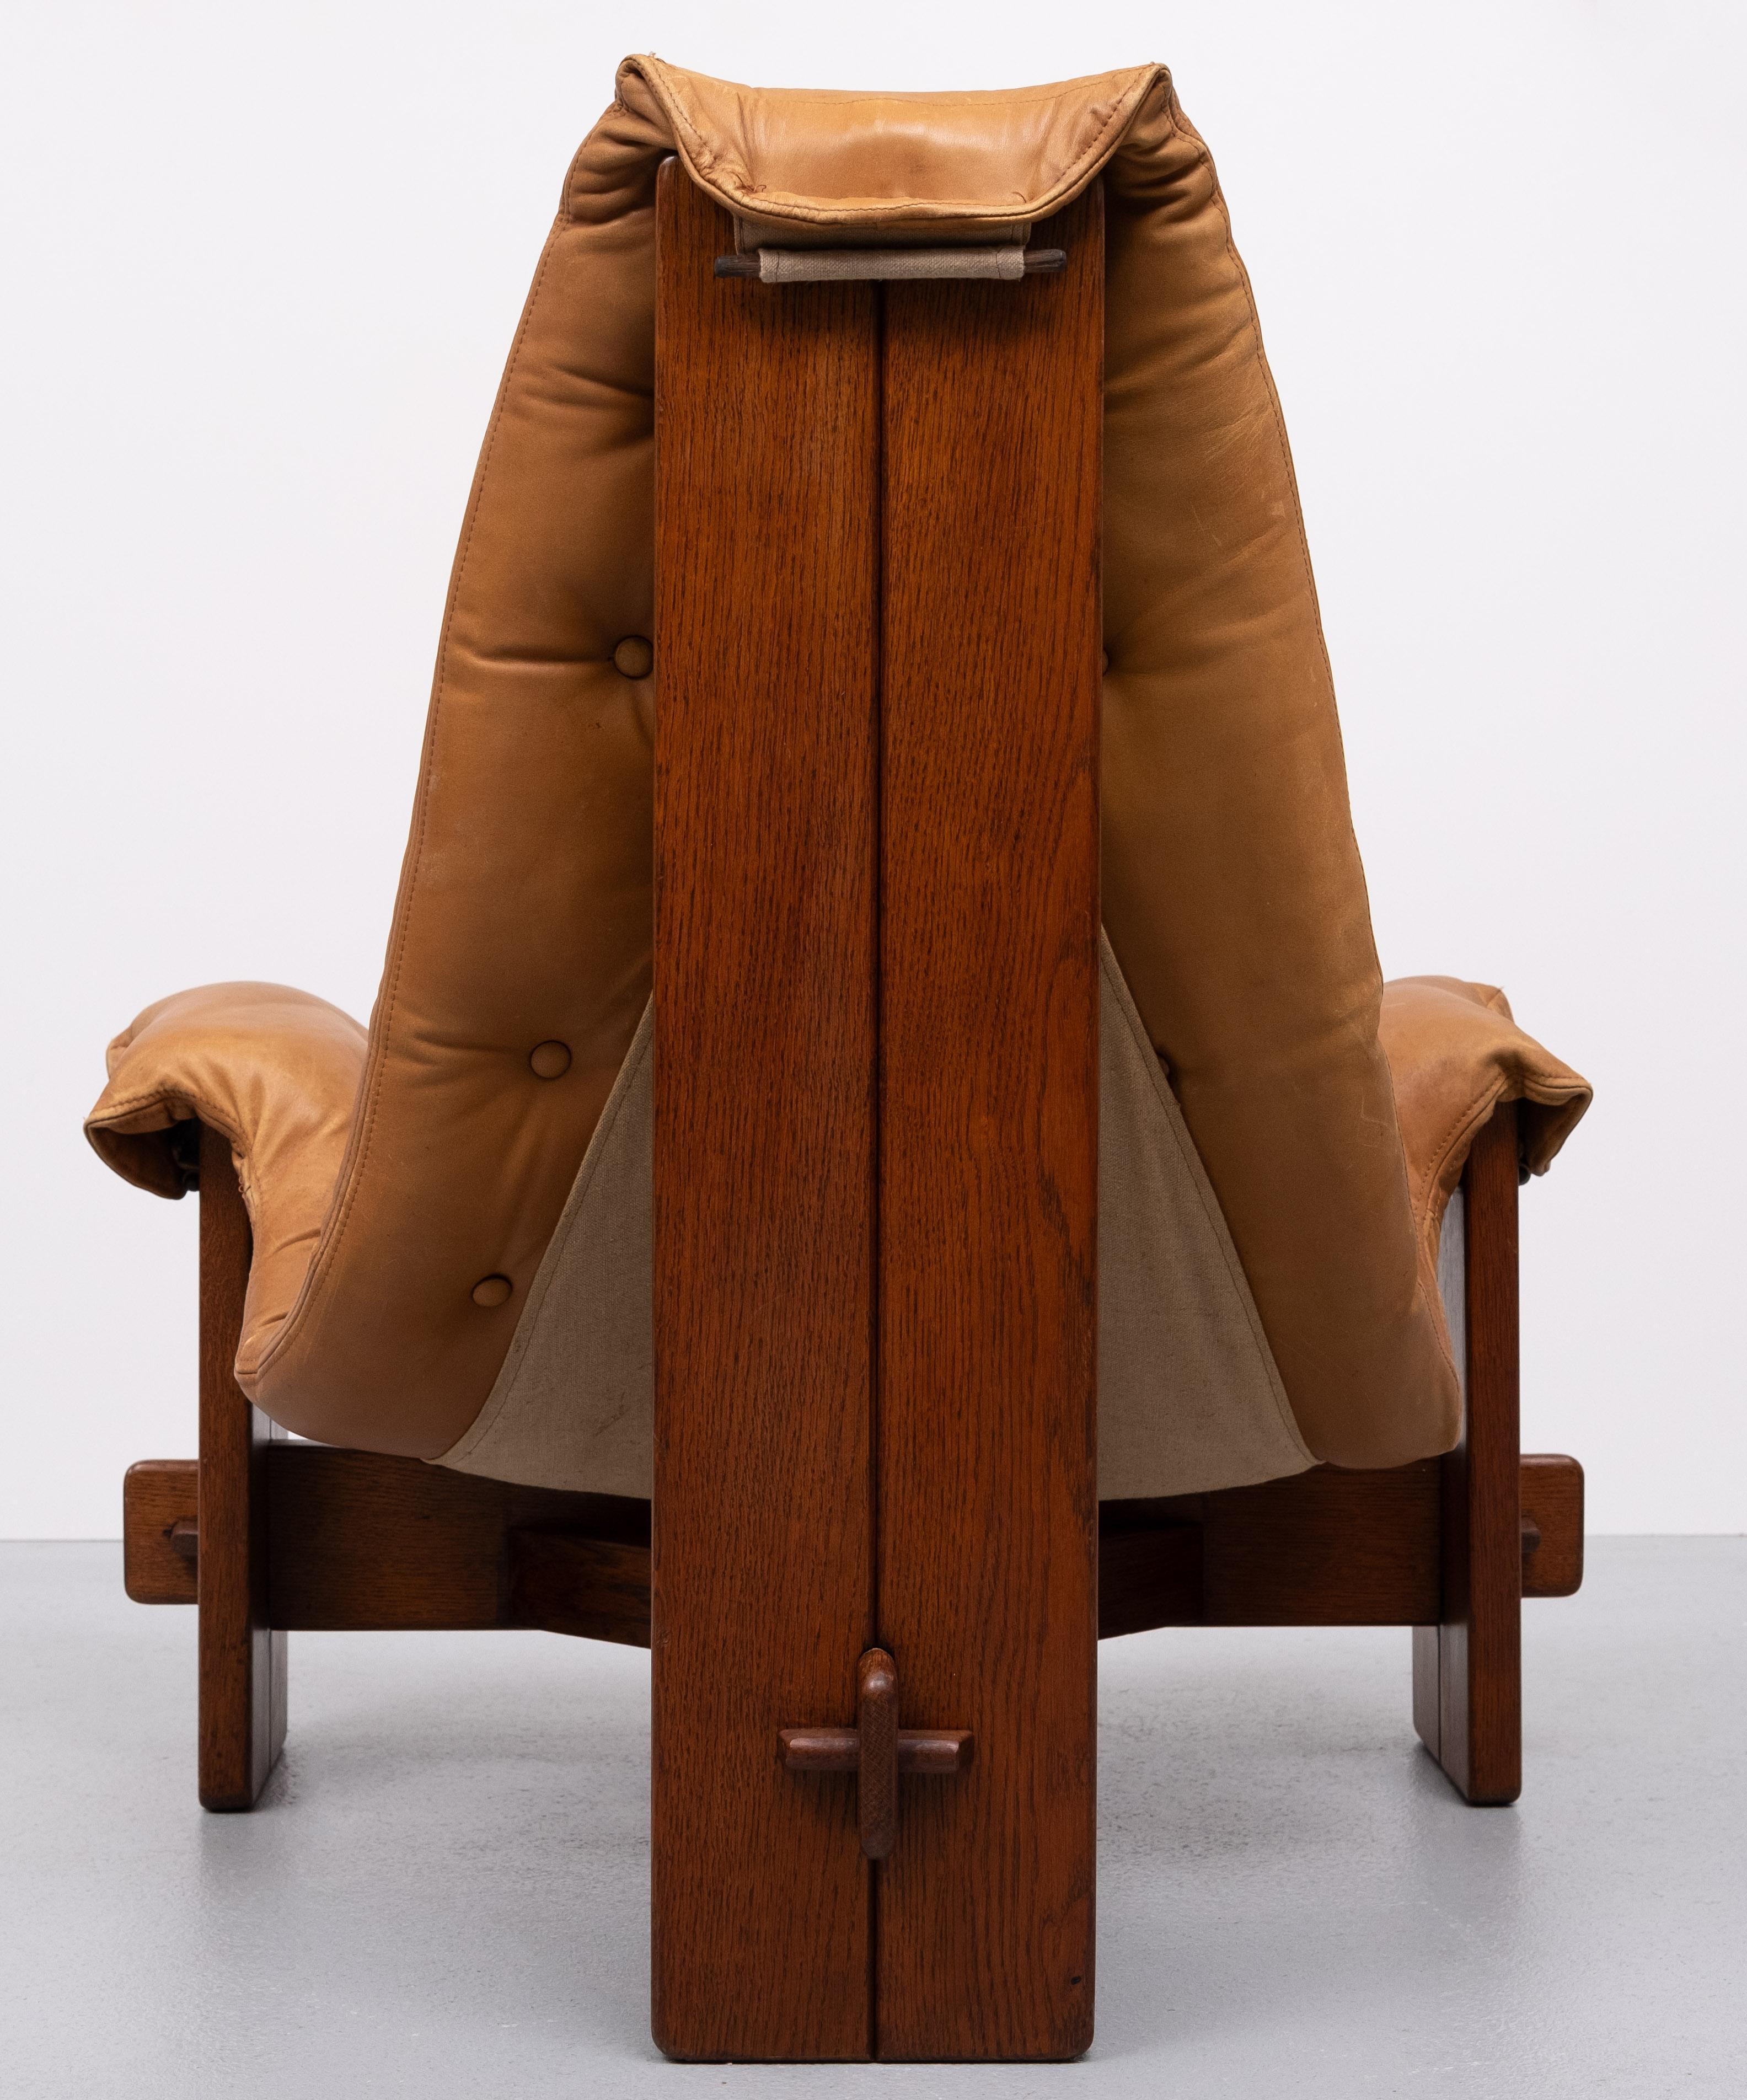 Mid-20th Century  Brutalist Sling Lounge Chair in Full Original Condition 1960s Brazil  For Sale